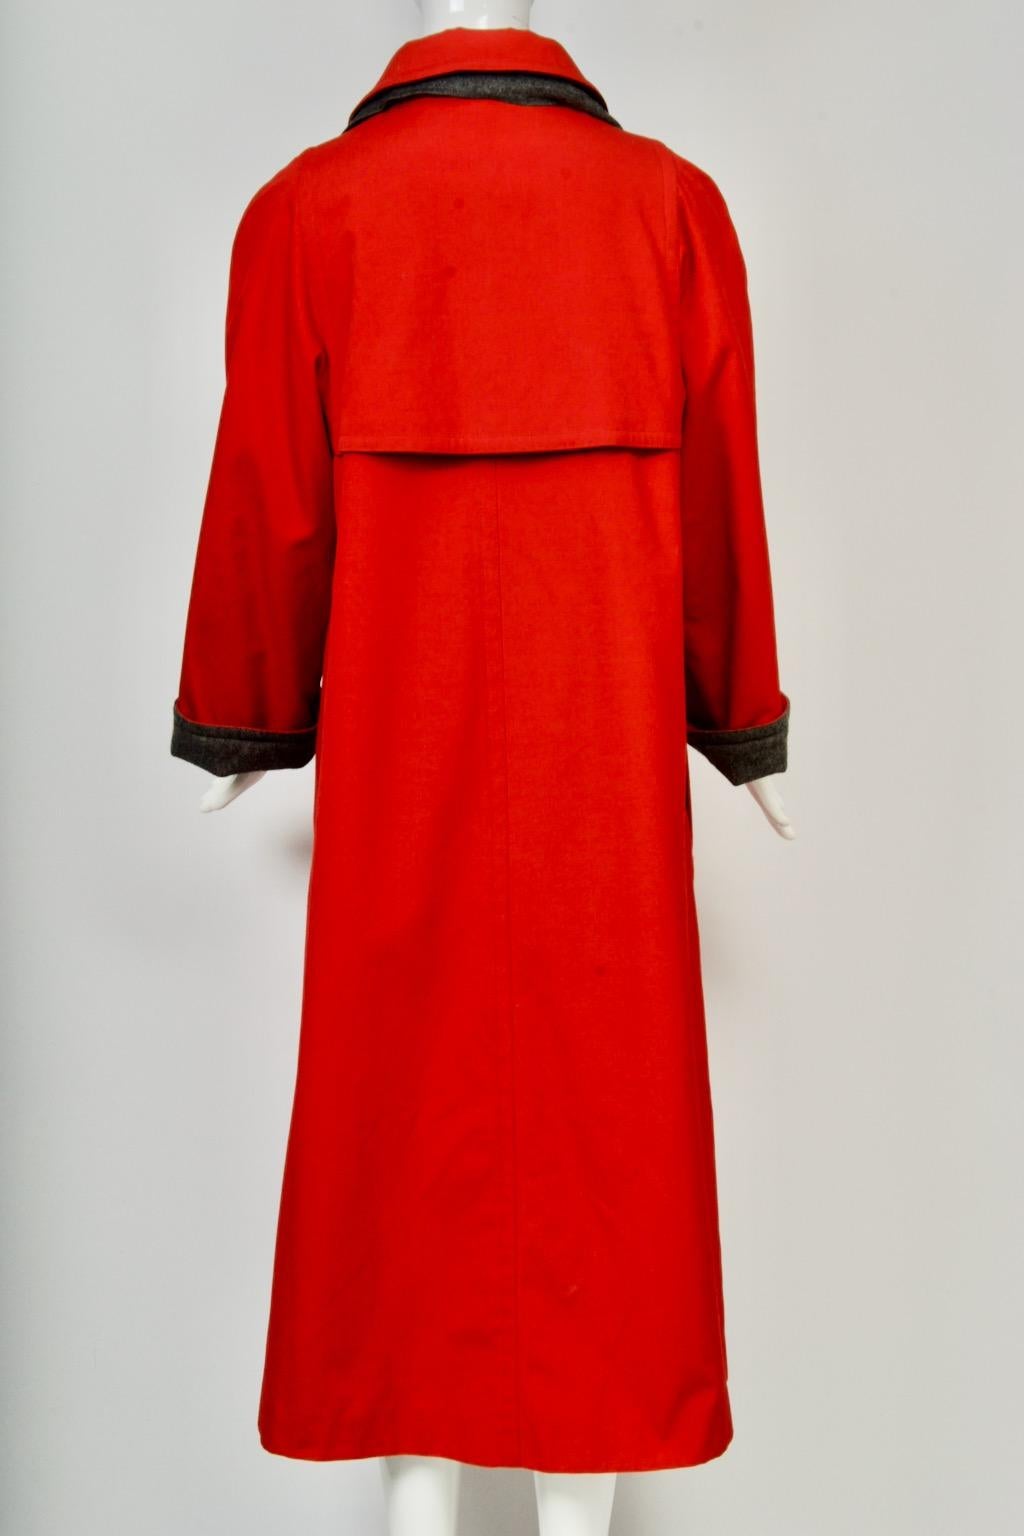 Bonnie Cashin Red Coat with Scarf For Sale 1